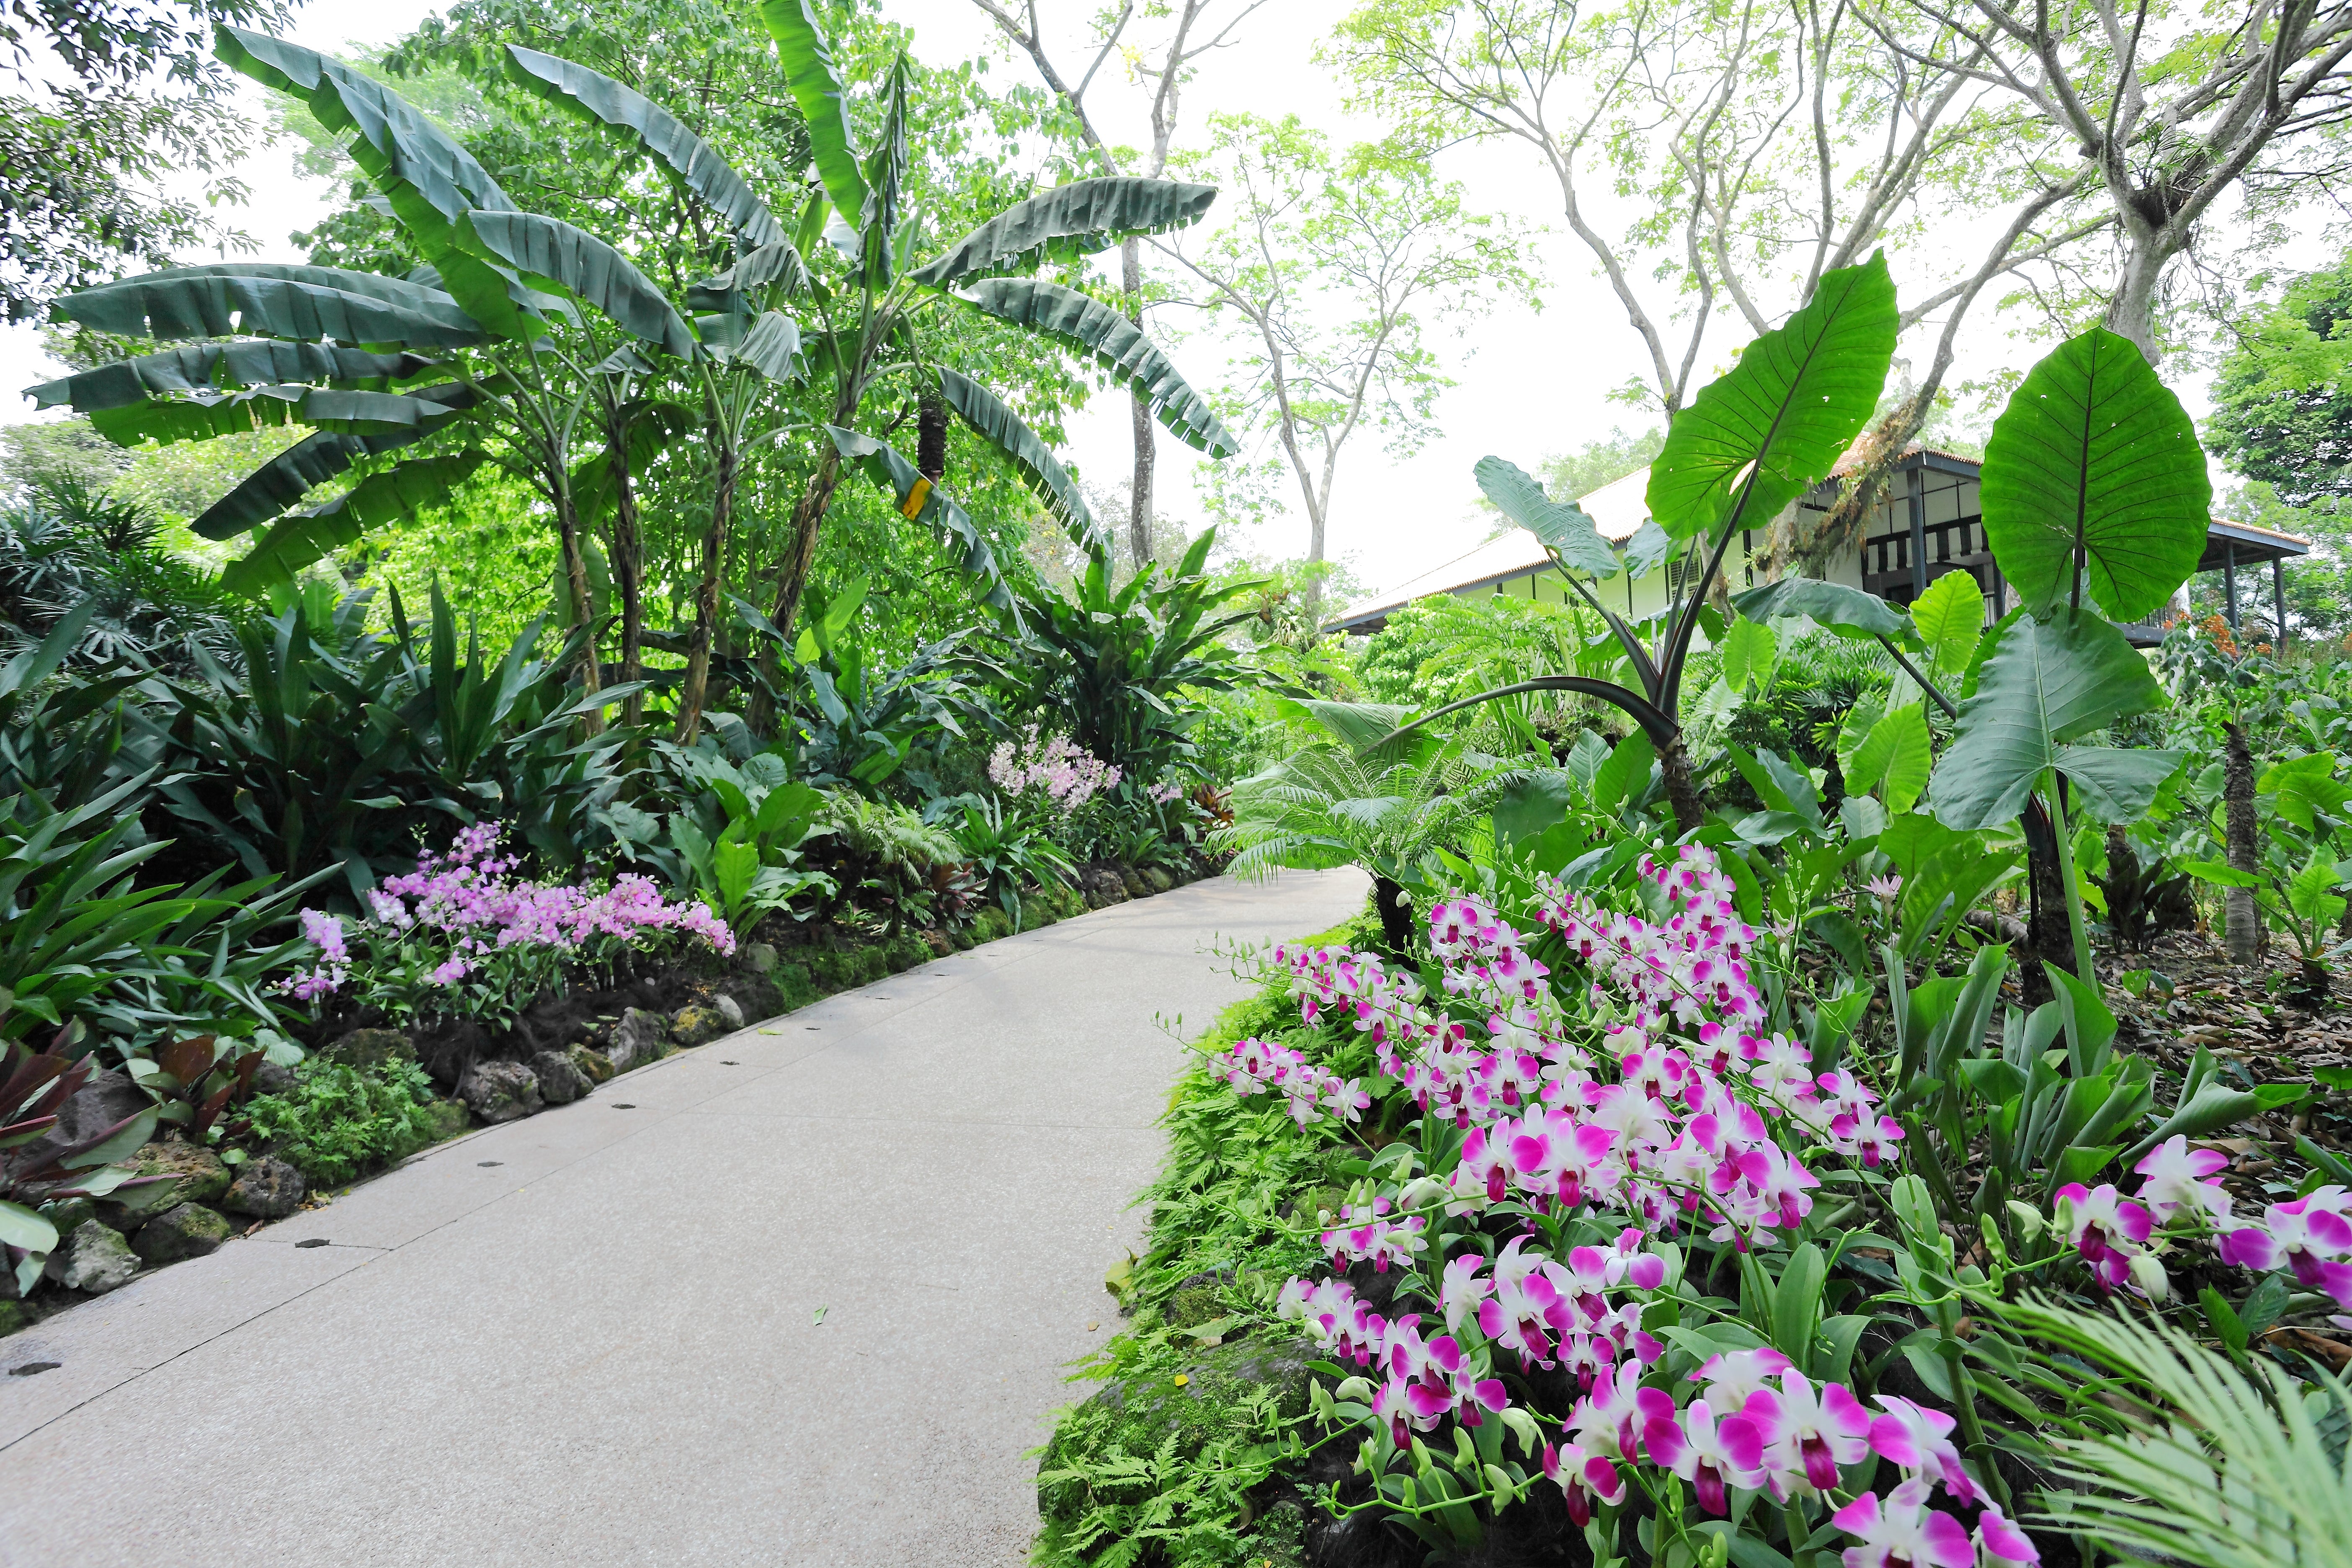 Add the National Orchid Garden at the Botanic Gardens to your to-view list